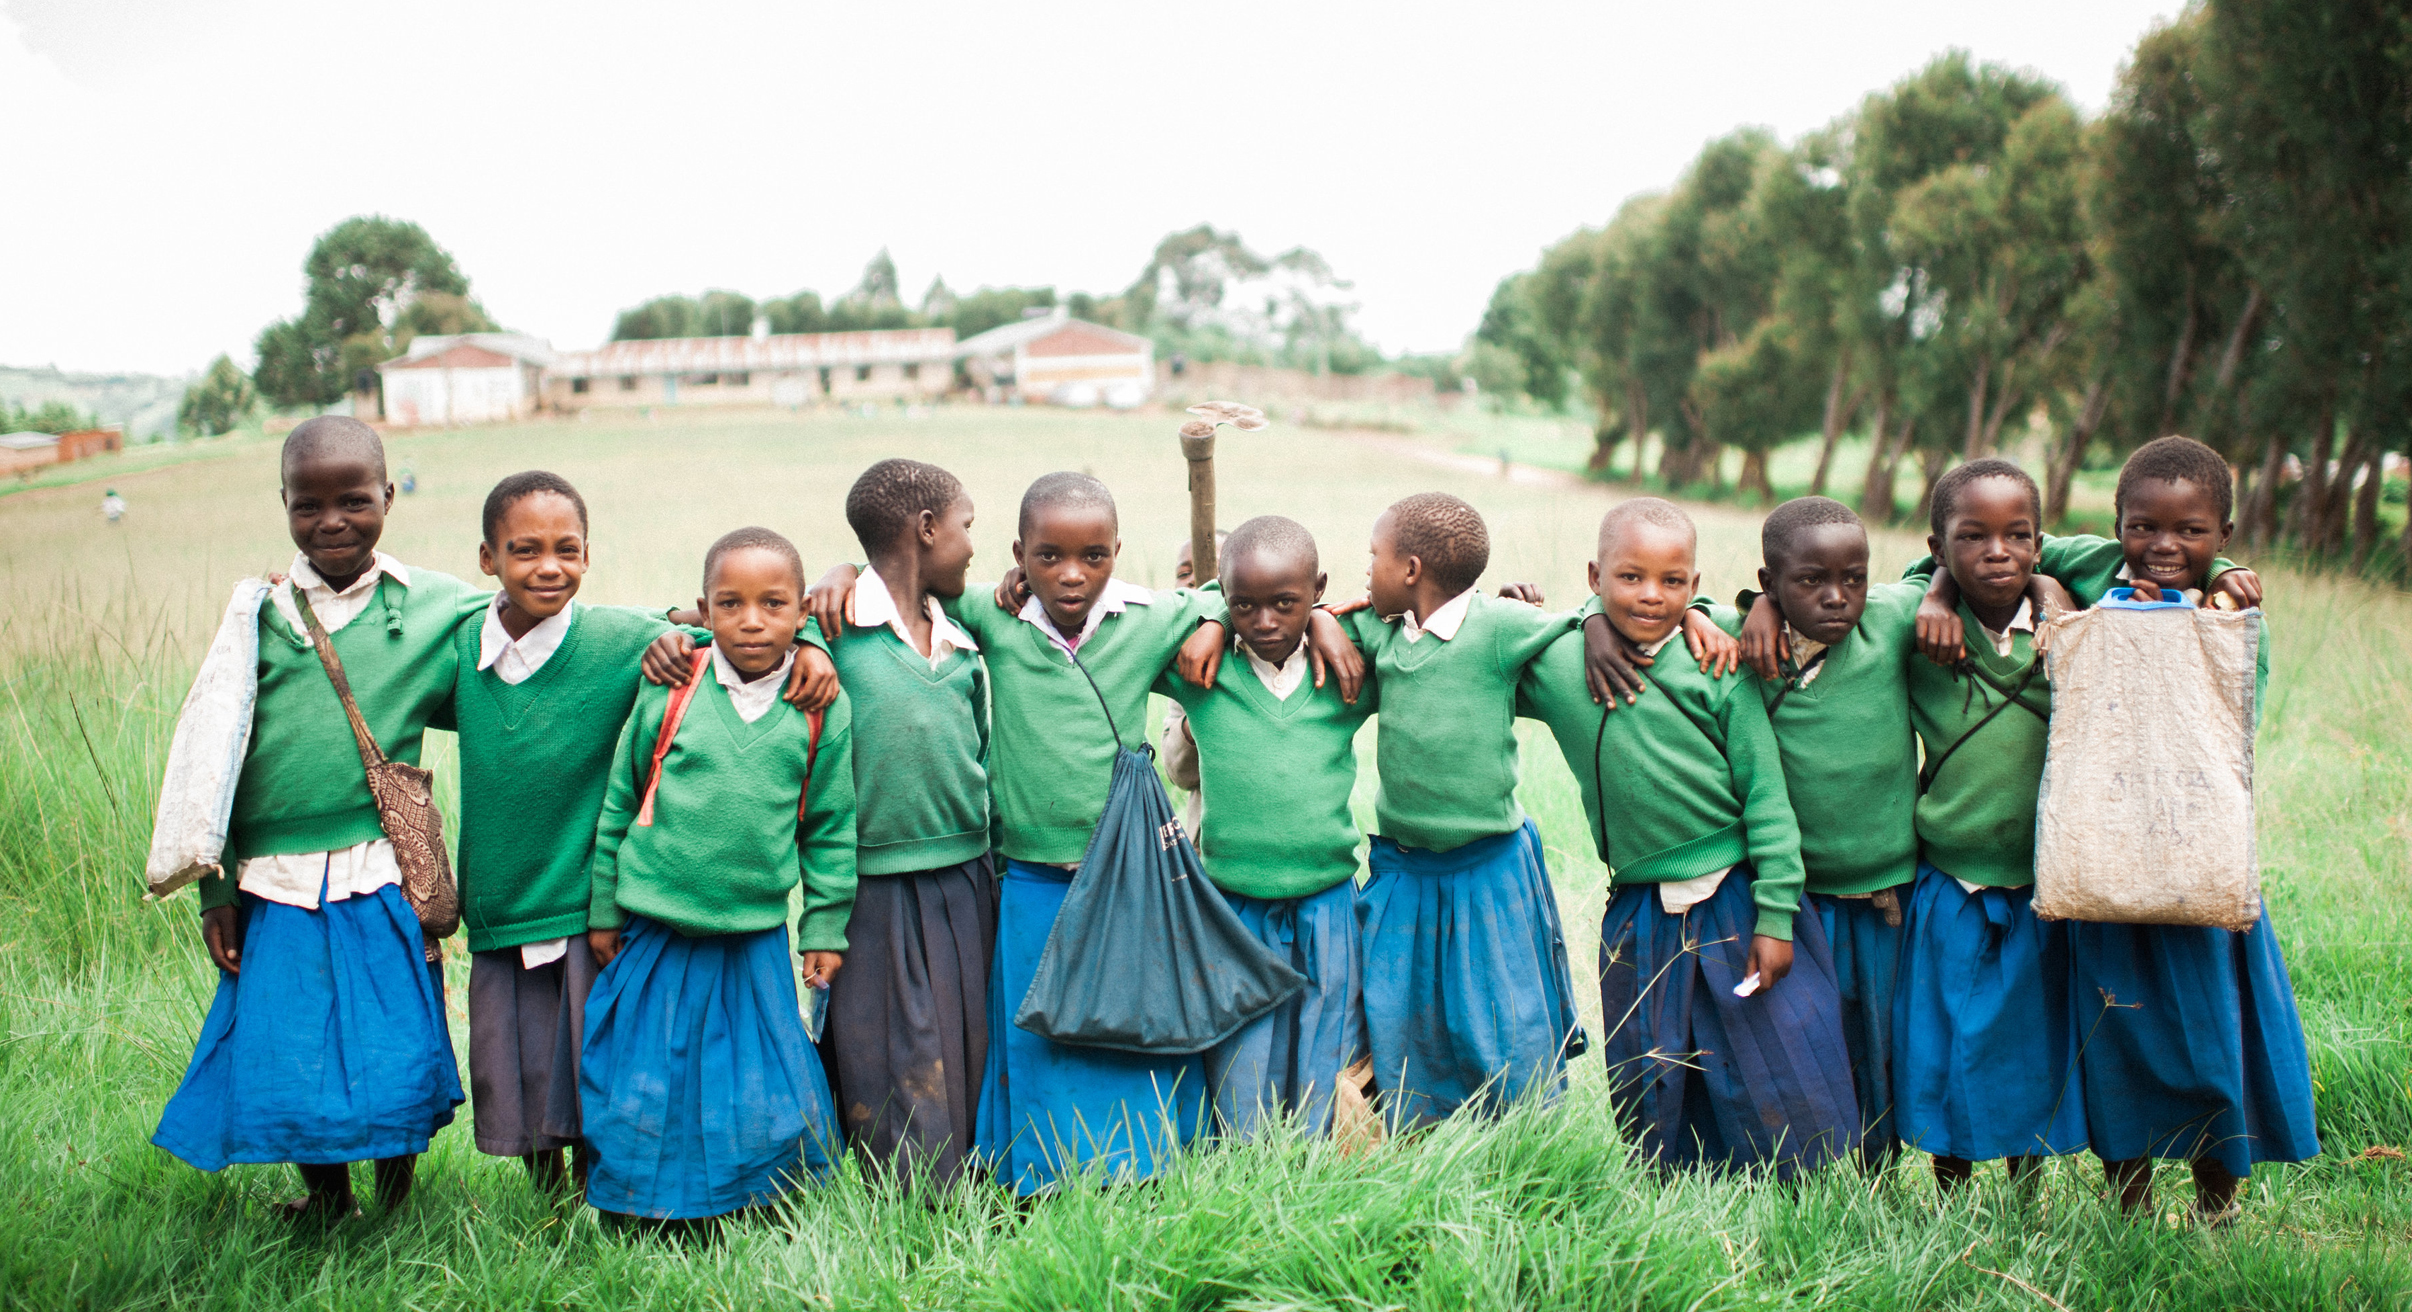 Children from Foxes Community Project in Tanzania